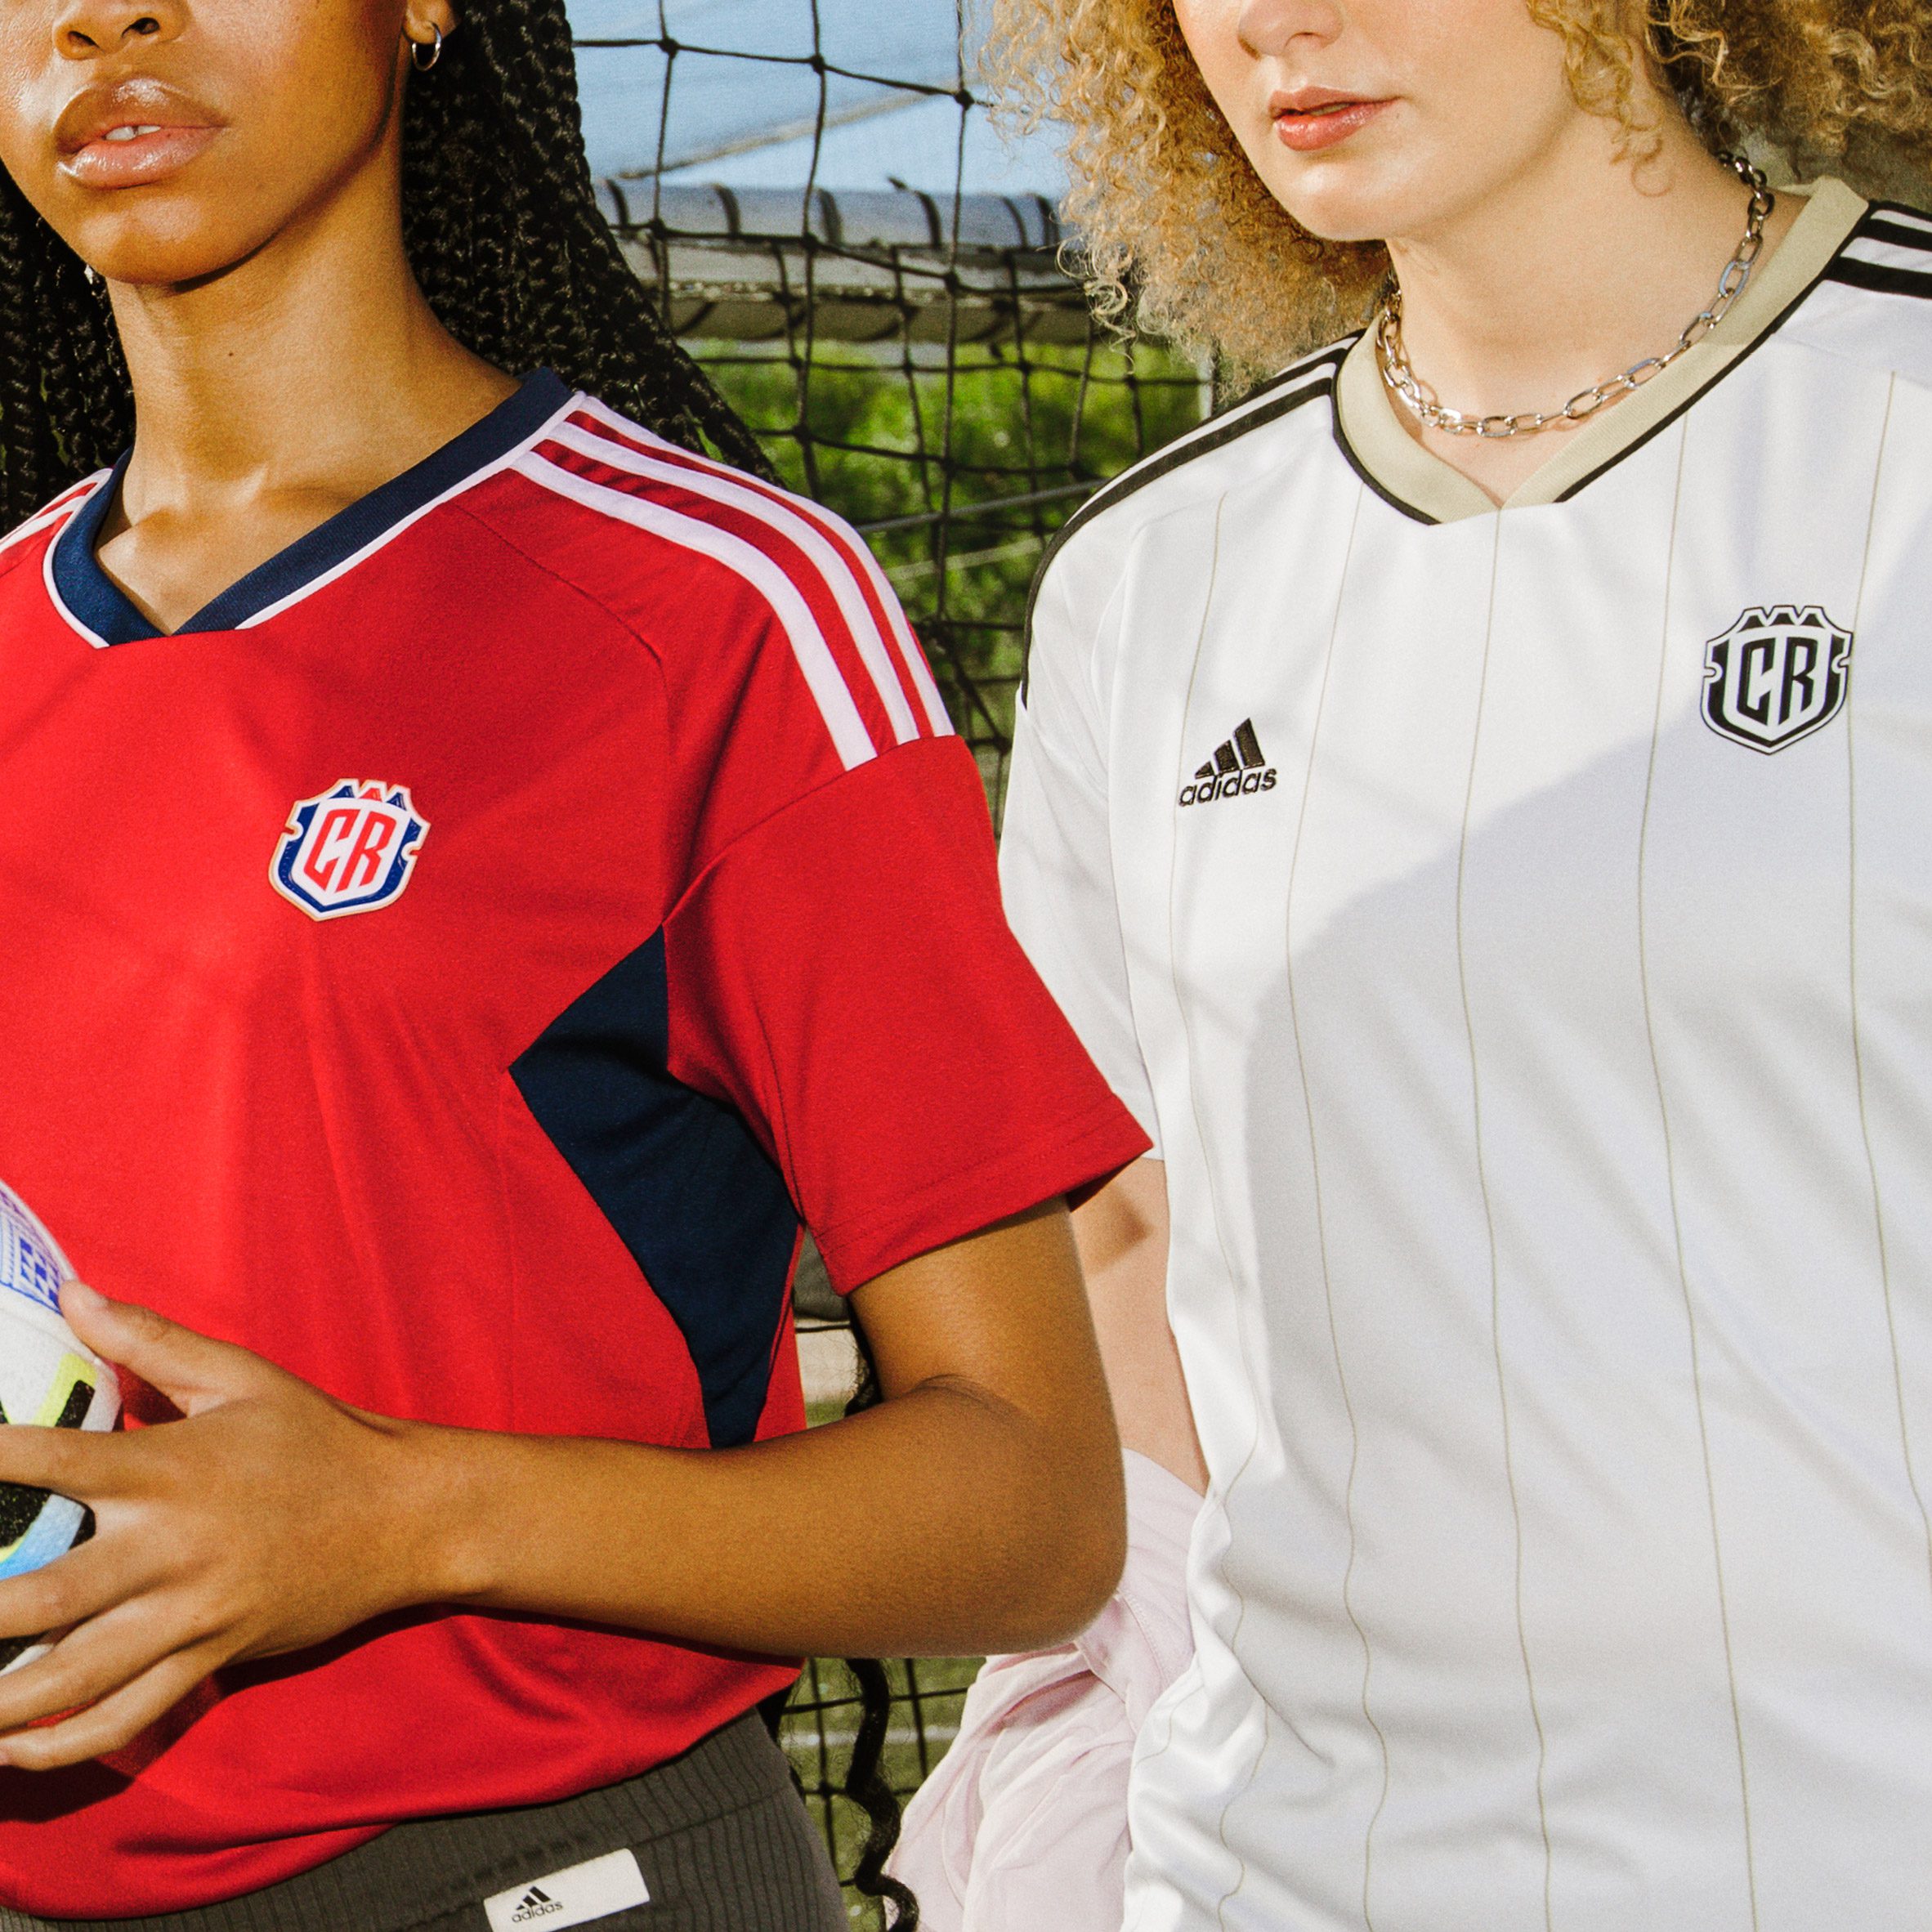 Adidas home and away kits for Costa Rica